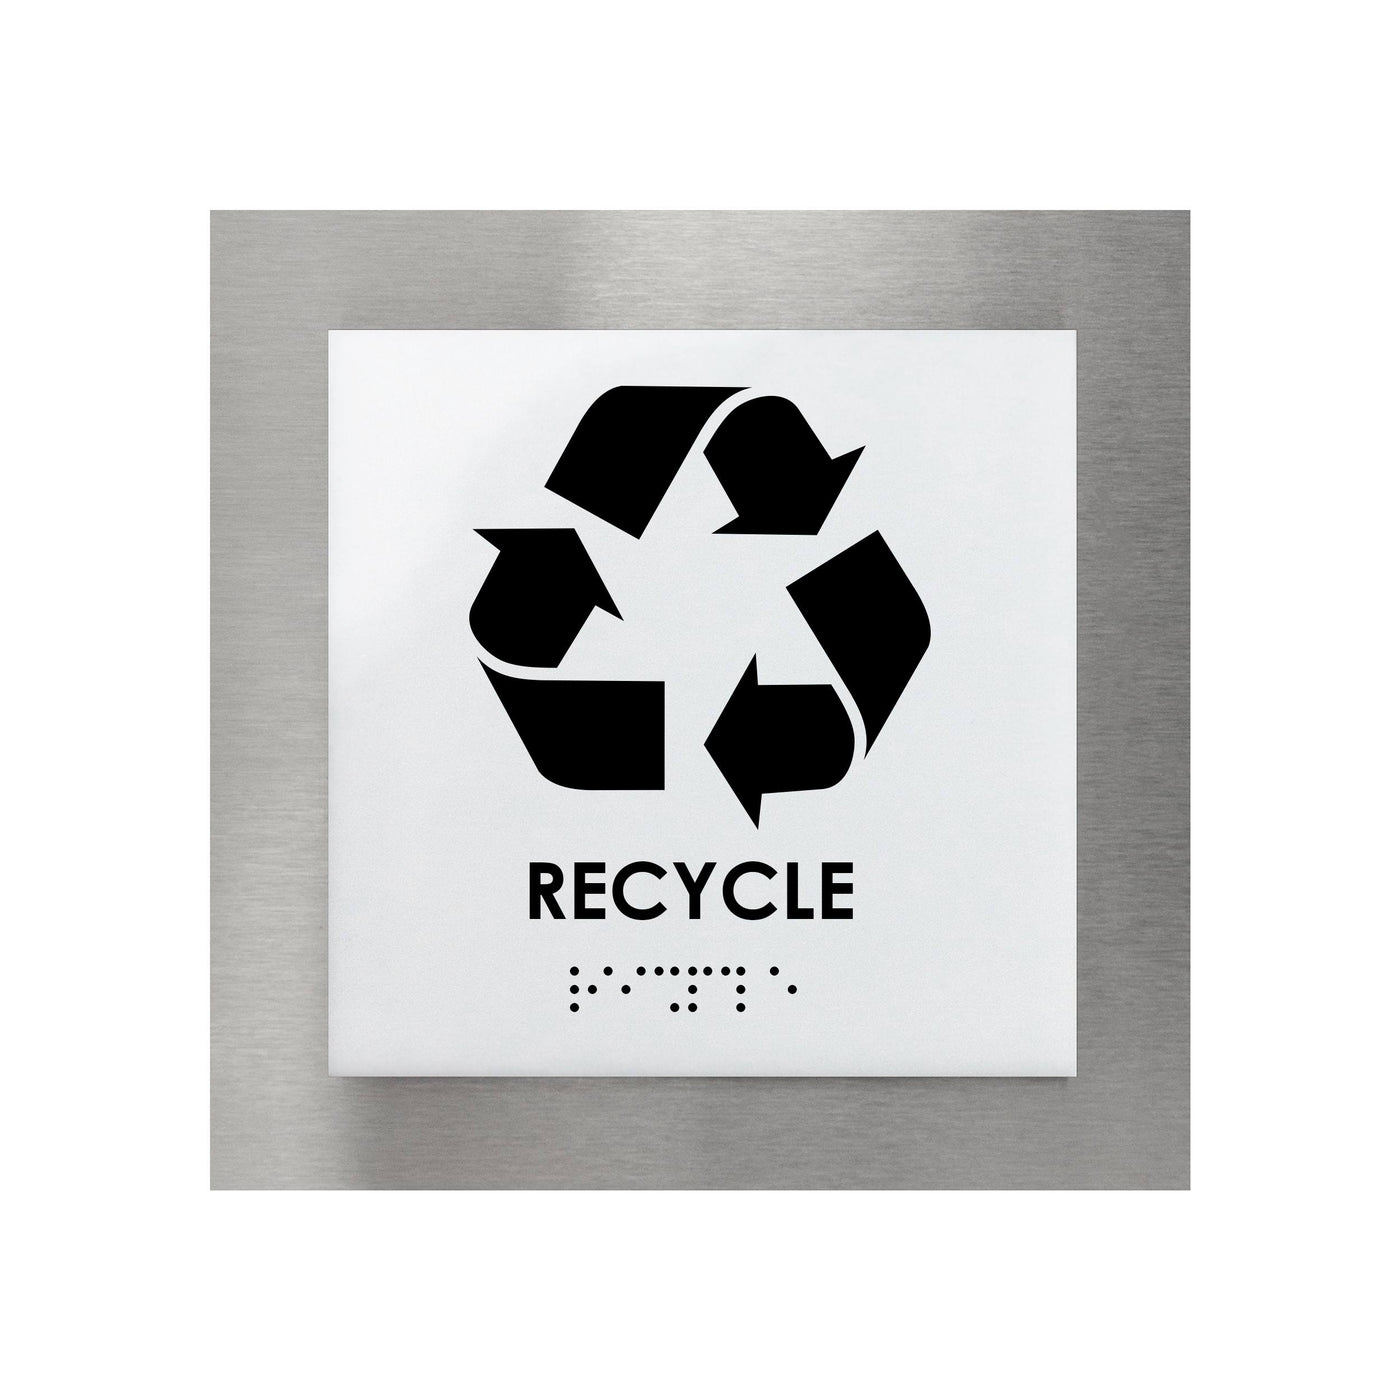 Door Signs - Steel Recycle Sign With Braille "Modern" Design